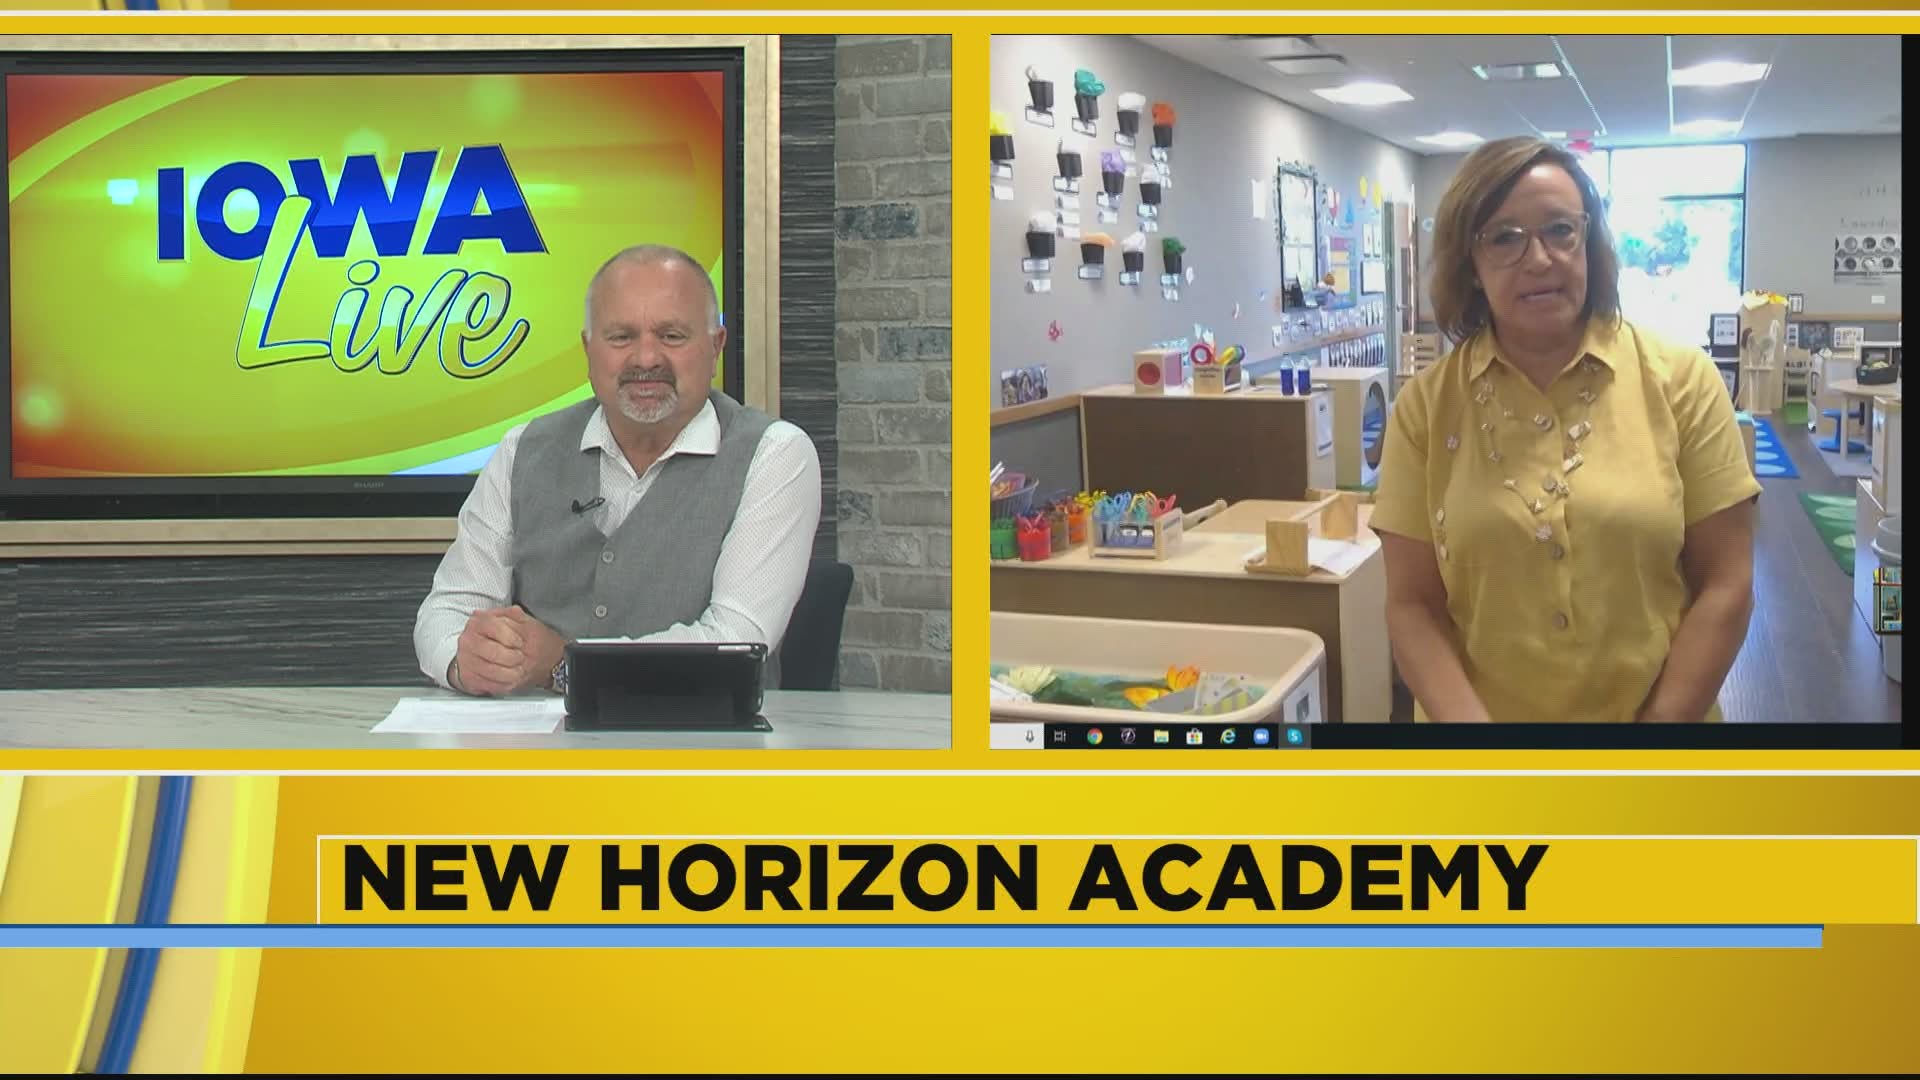 Lou talks with New Horizon Academy this morning on 'Iowa Live'